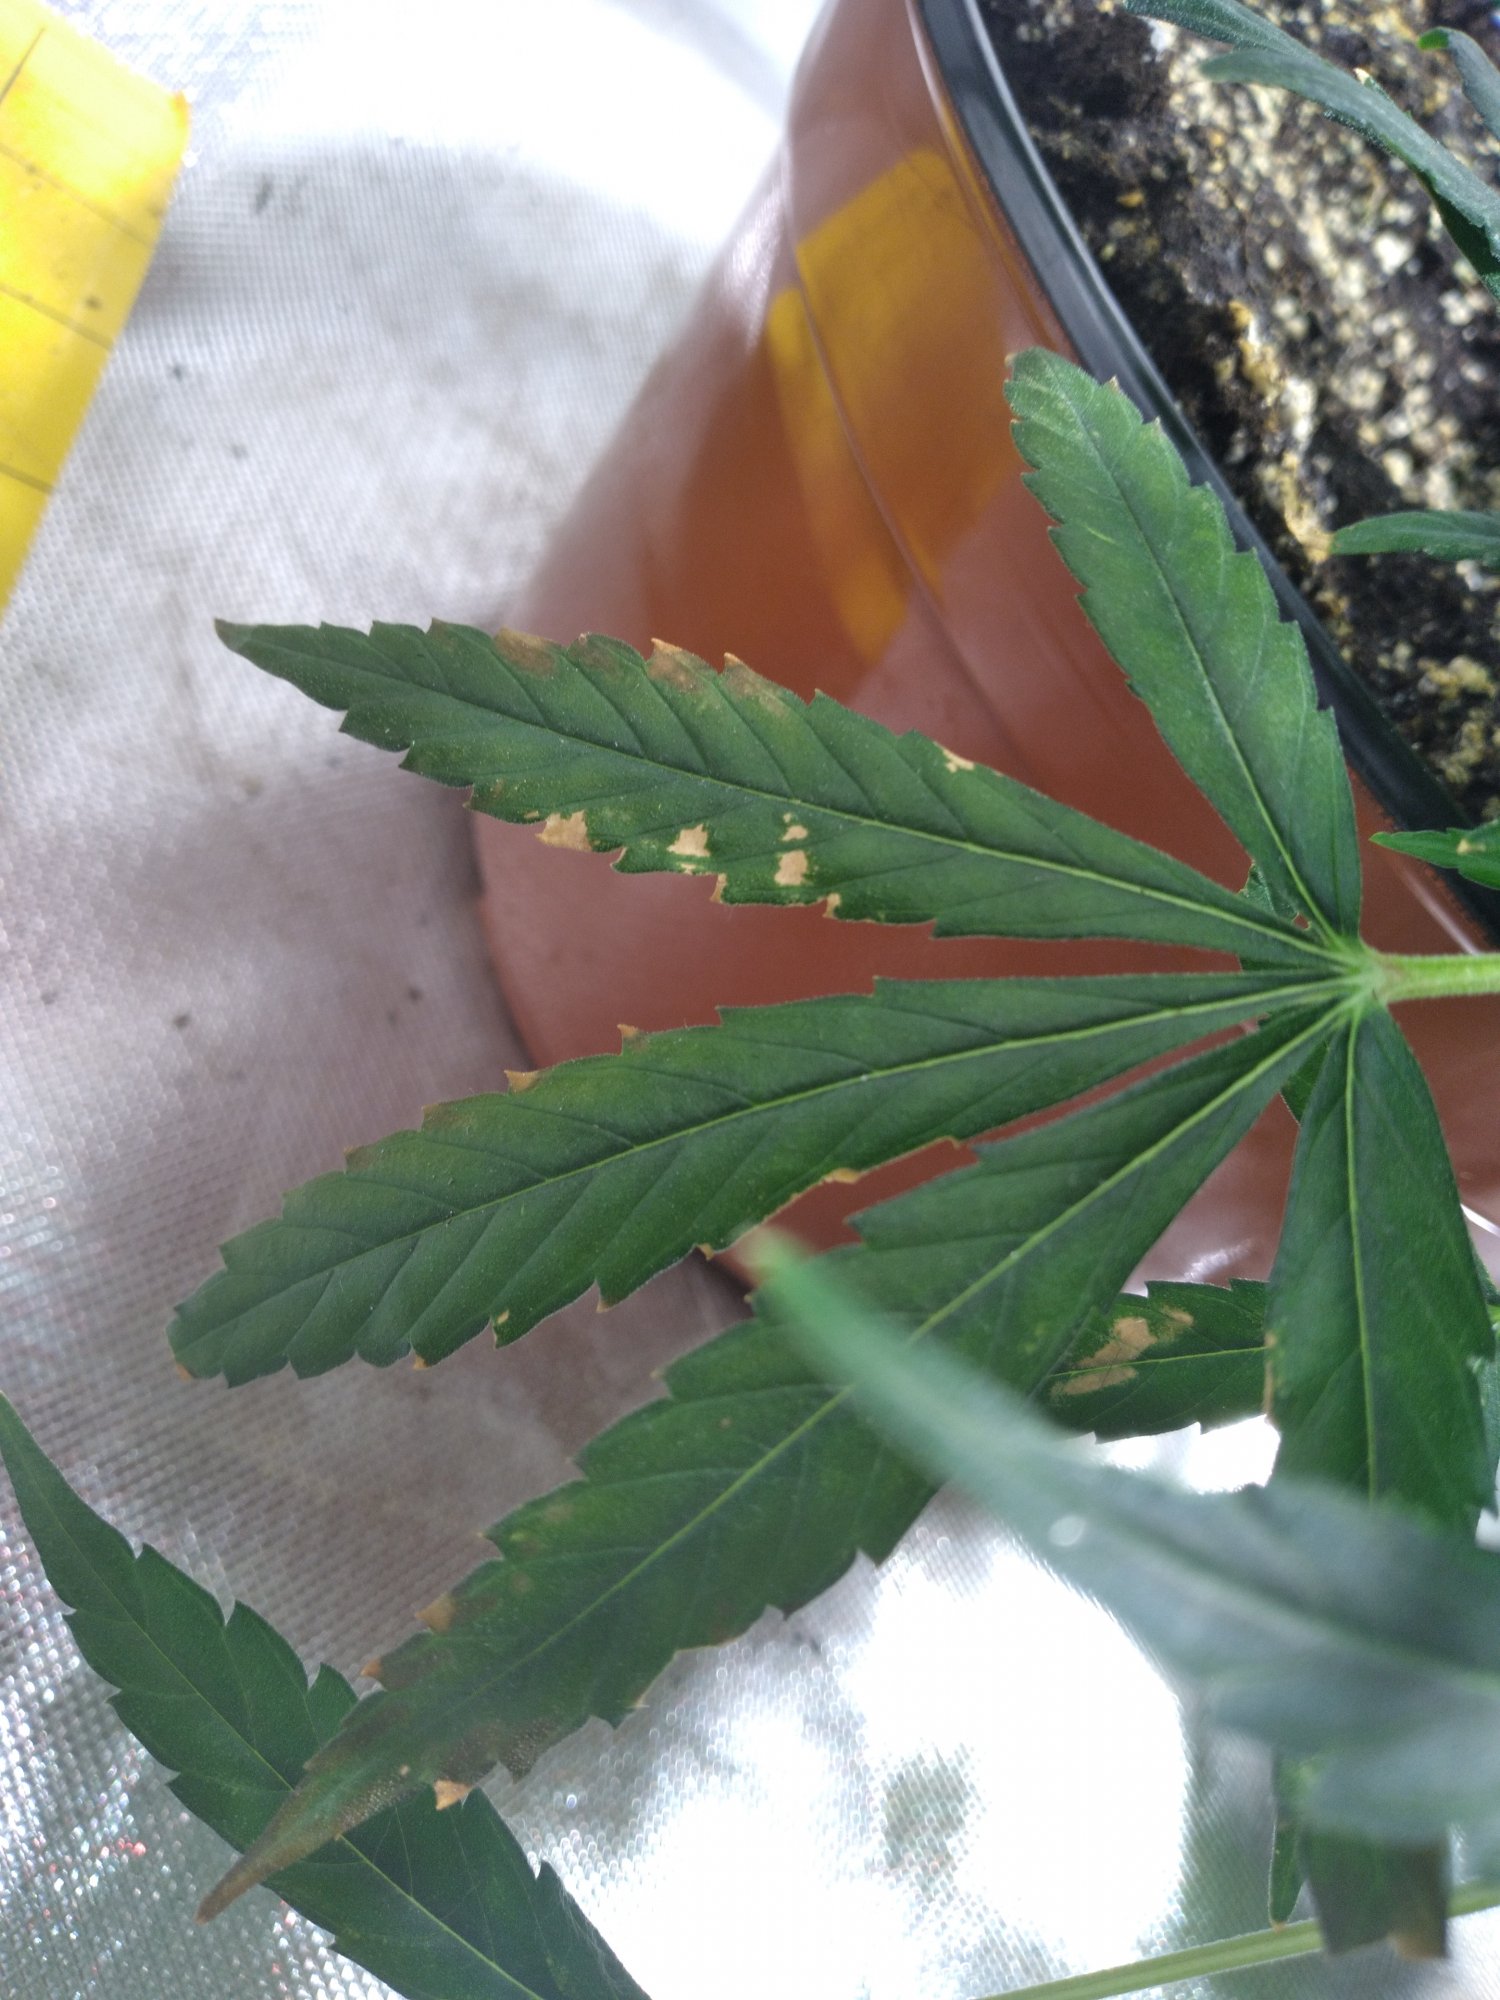 Got some problemsbrown leaves during flower 2